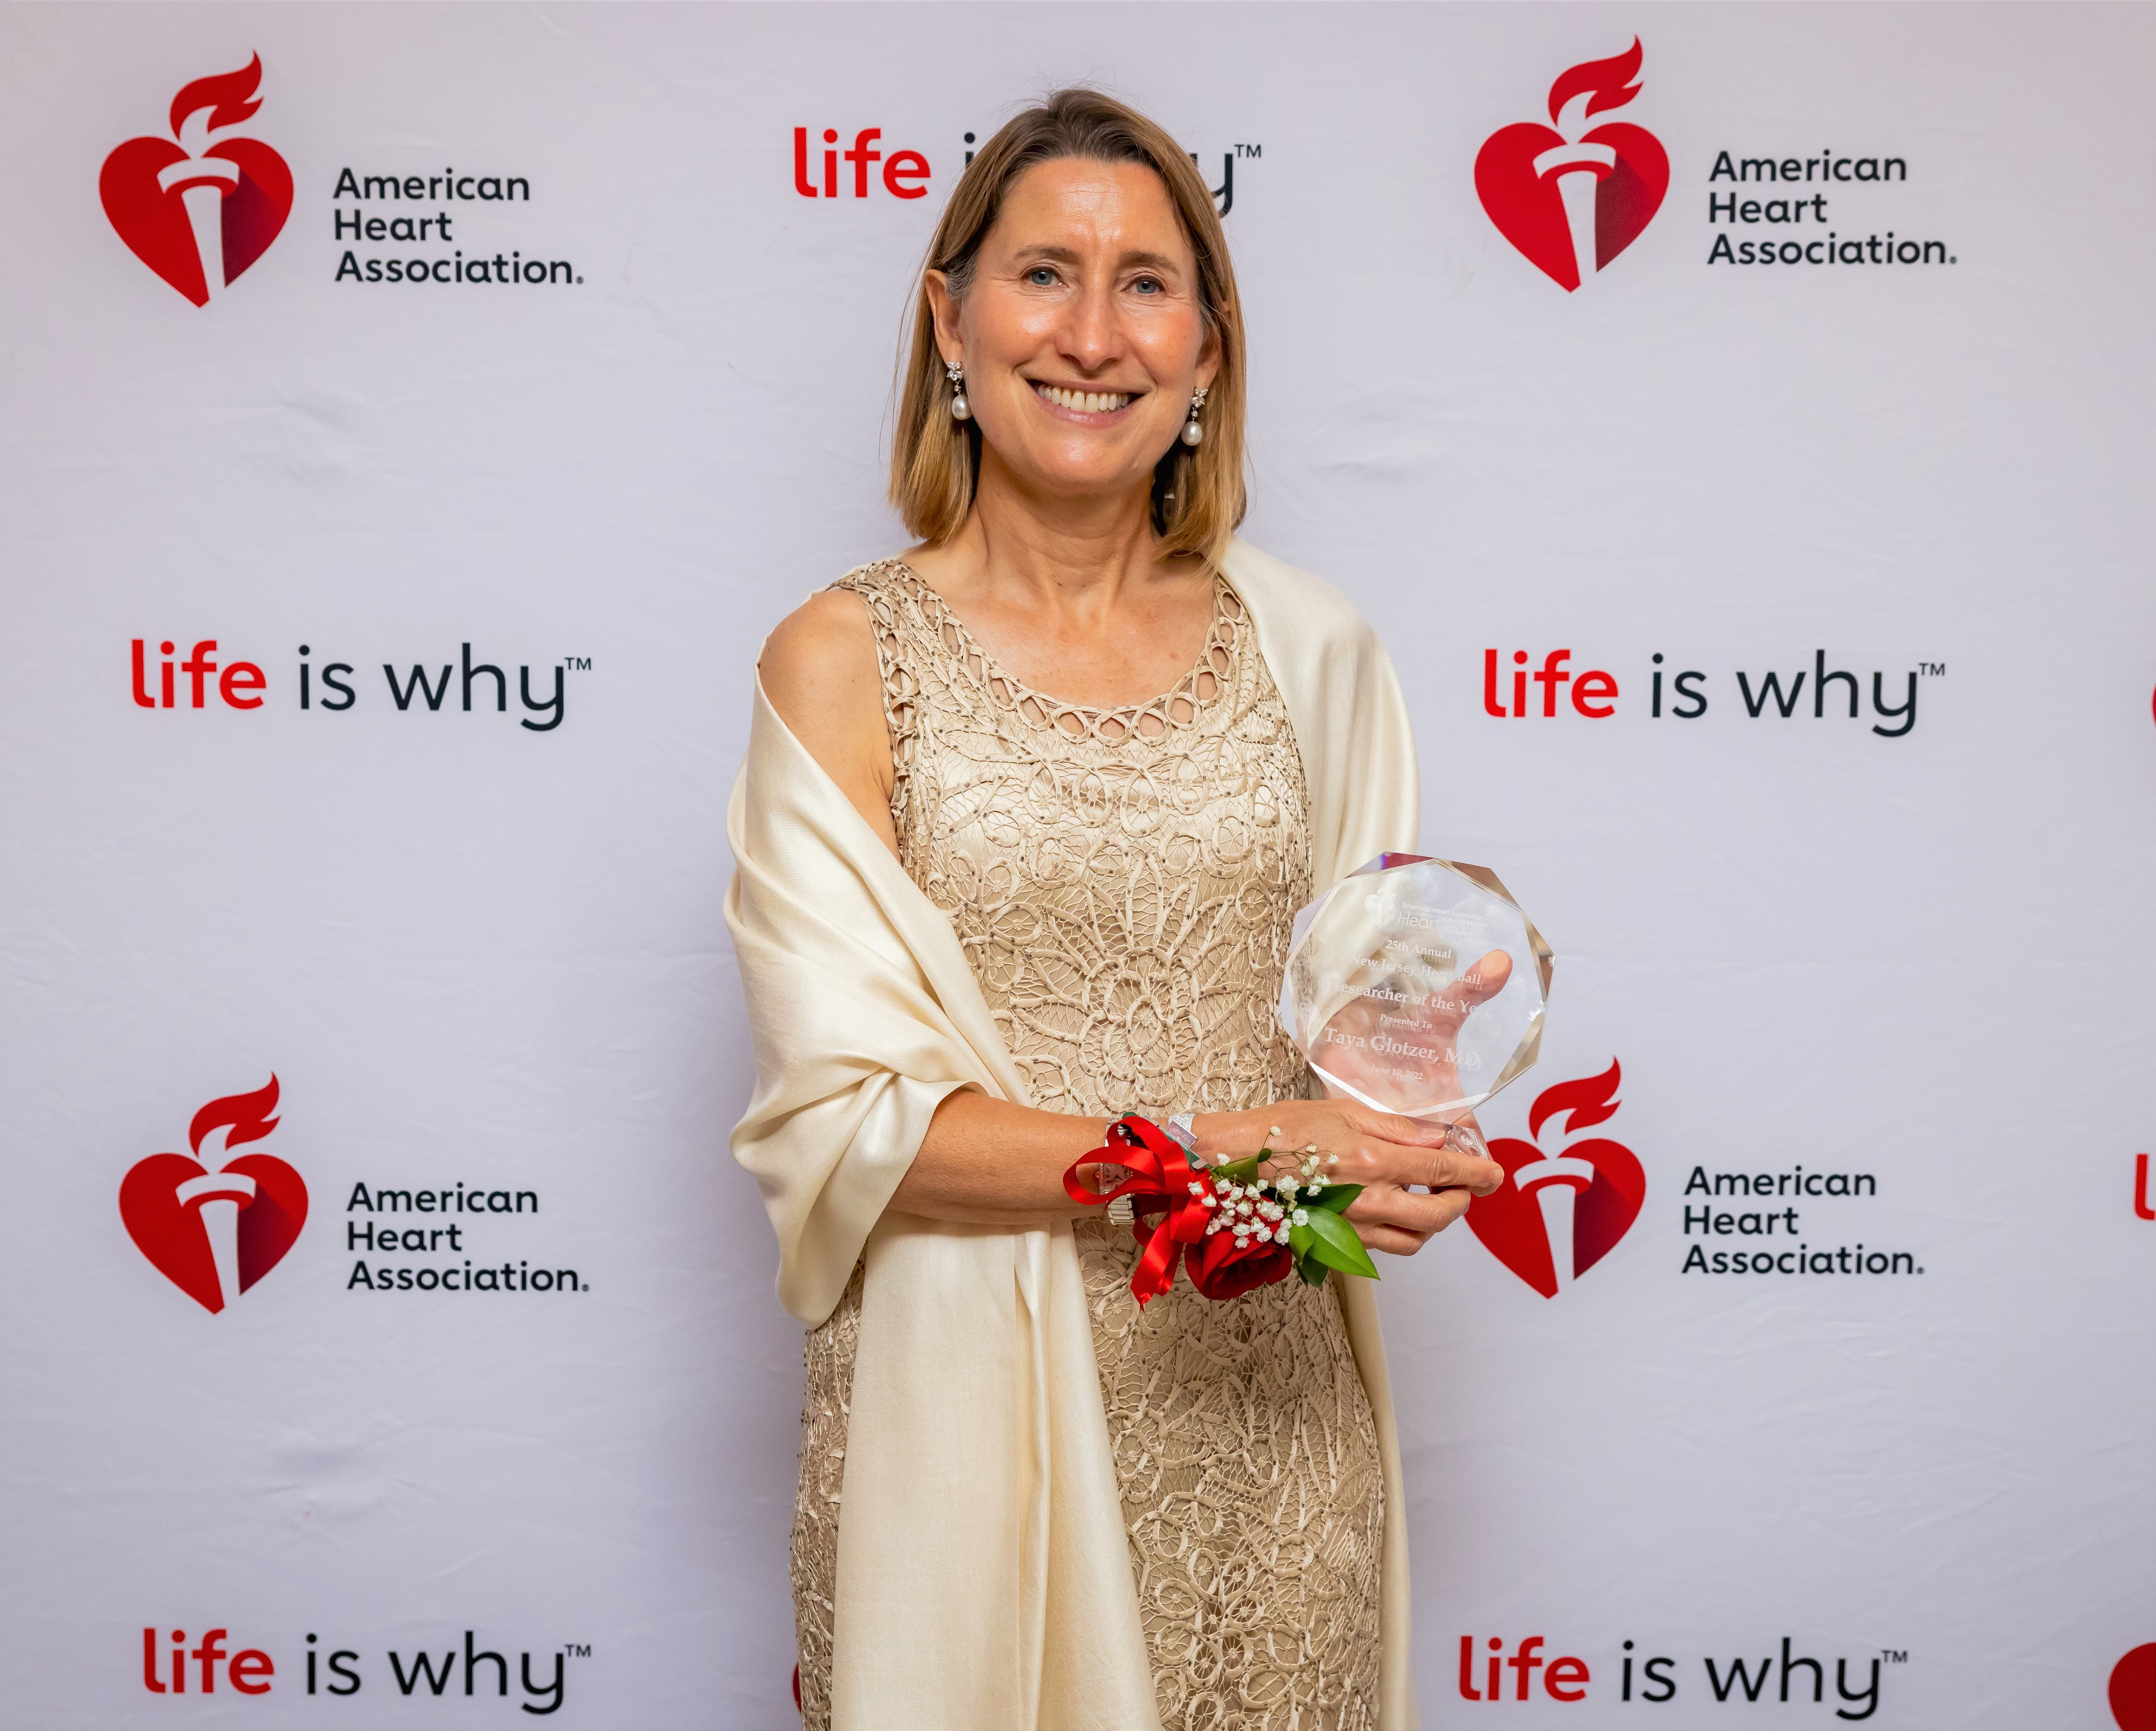 Hackensack Meridian School of Medicine Professor and Director of Cardiac Research at Hackensack University Medical Center Named American Heart Association’s Researcher of the Year